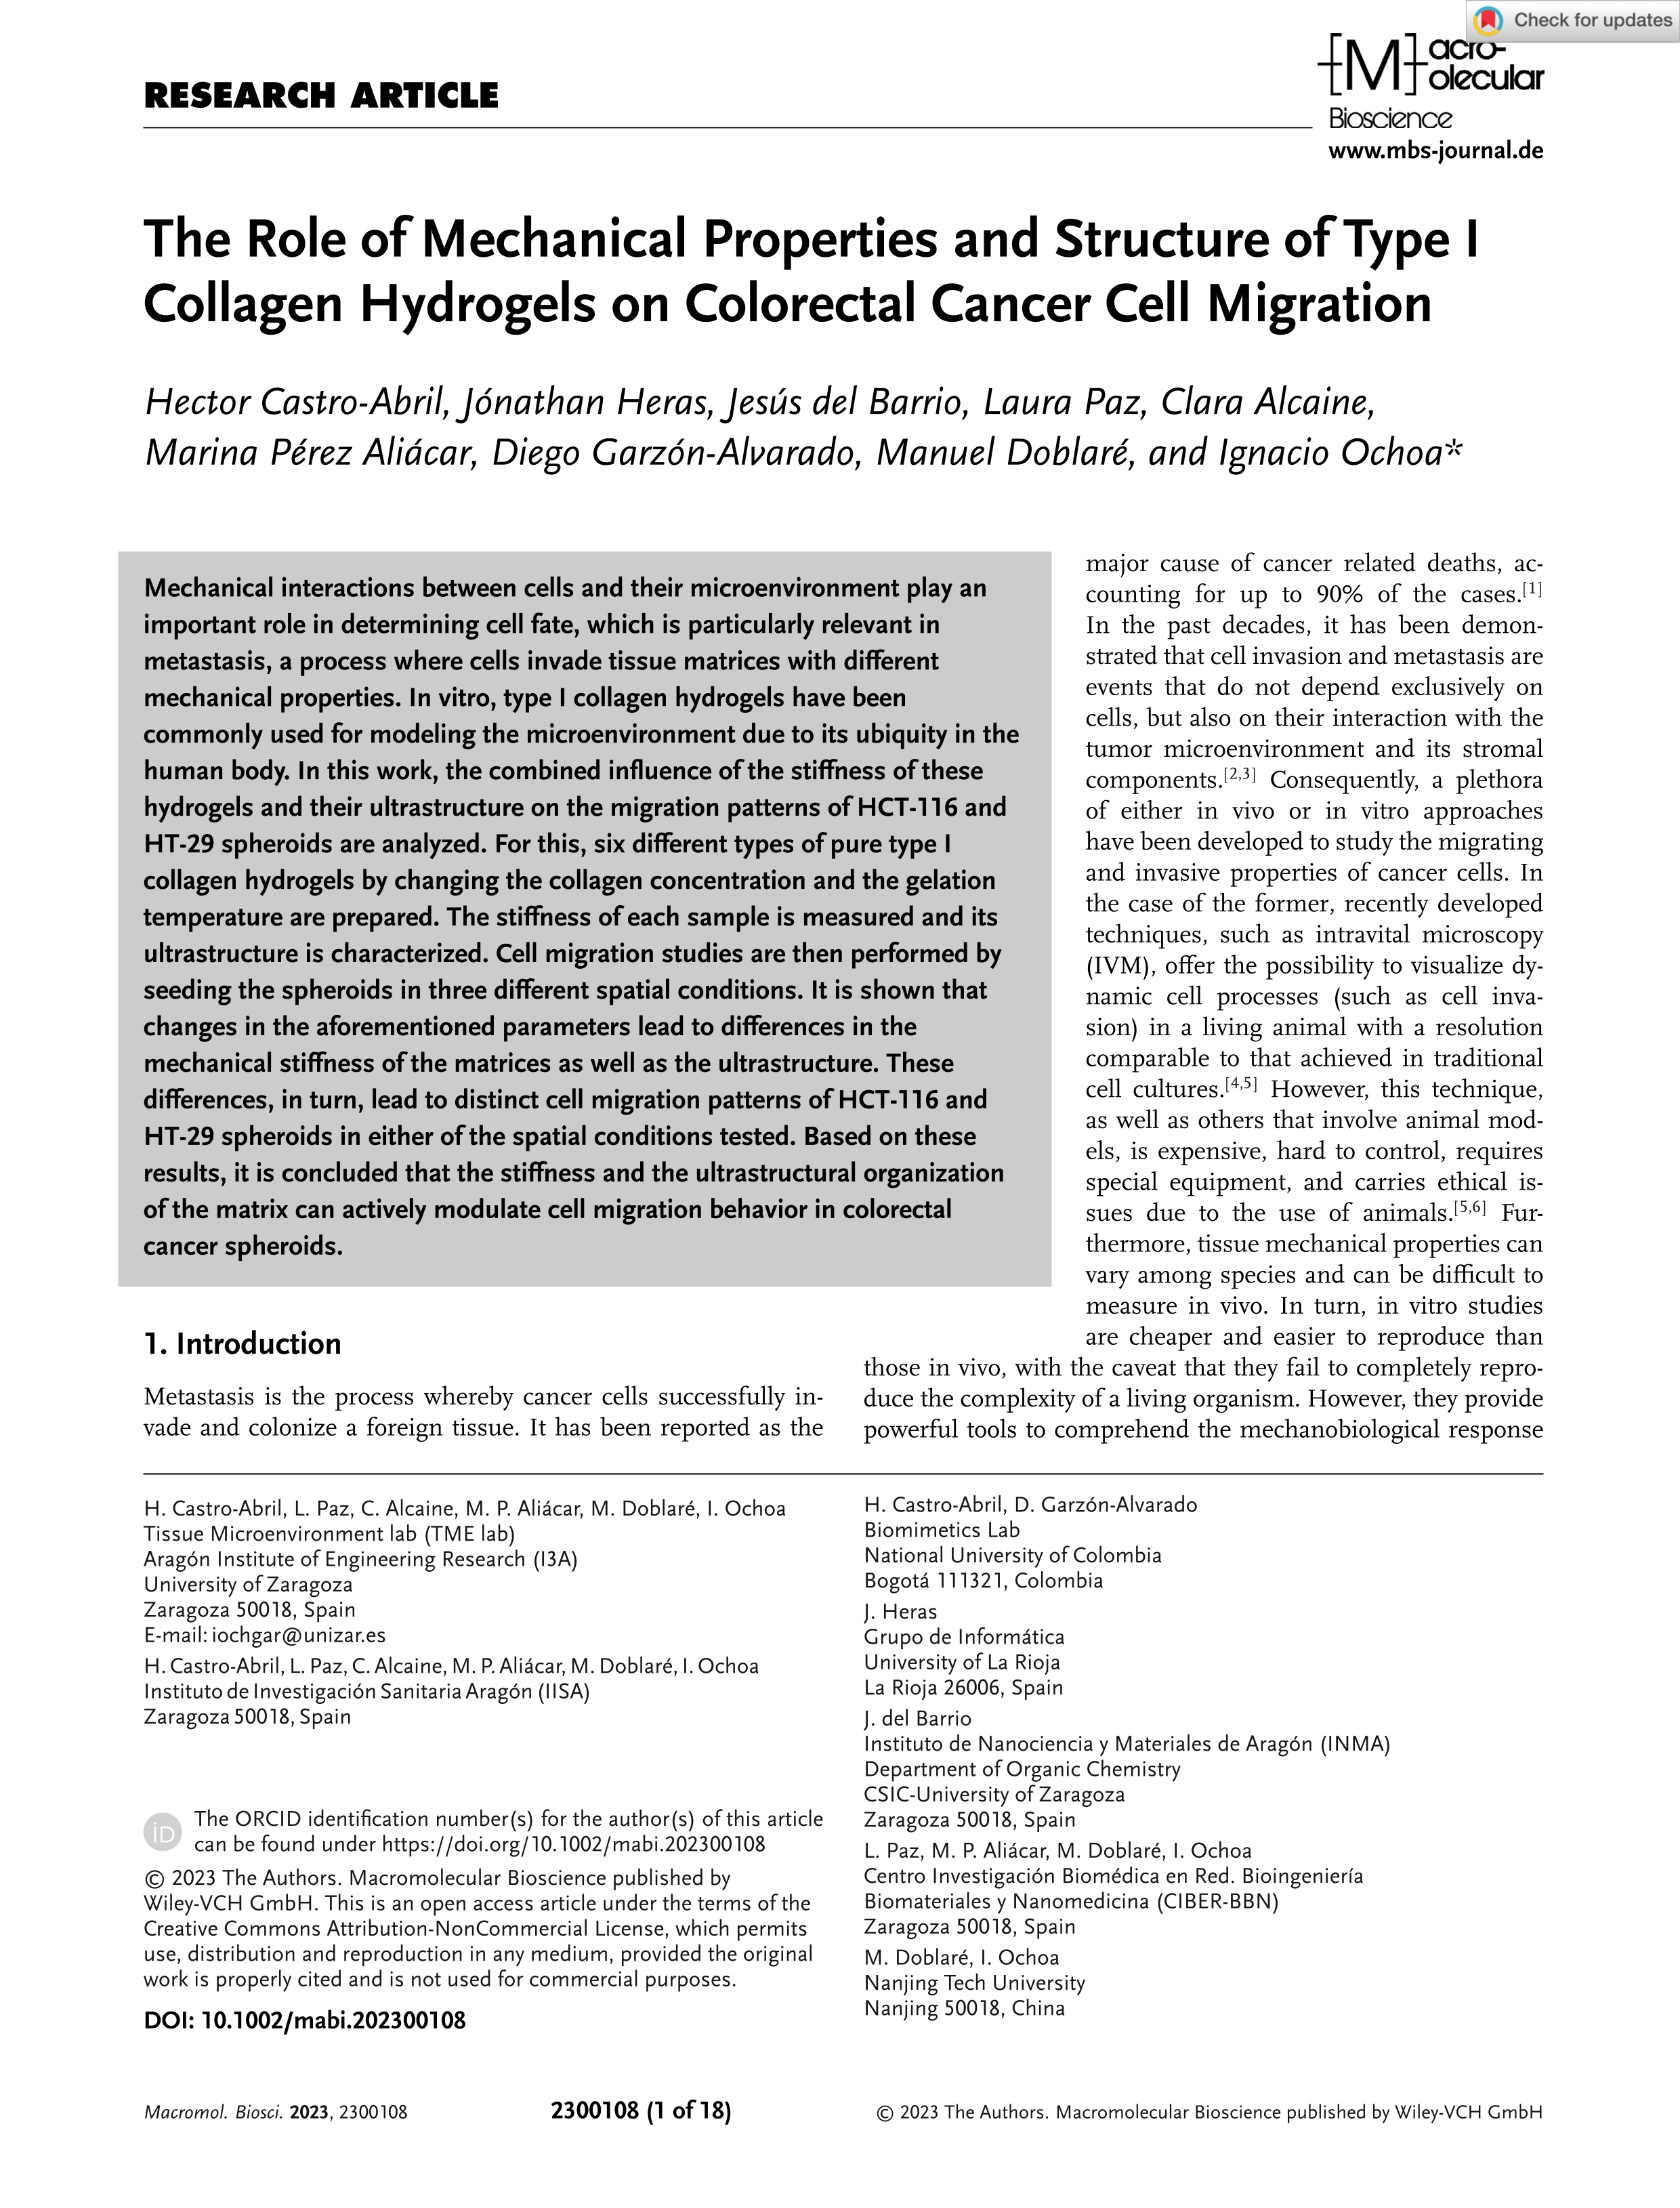 The Role of Mechanical Properties and Structure of Type I Collagen Hydrogels on Colorectal Cancer Cell Migration